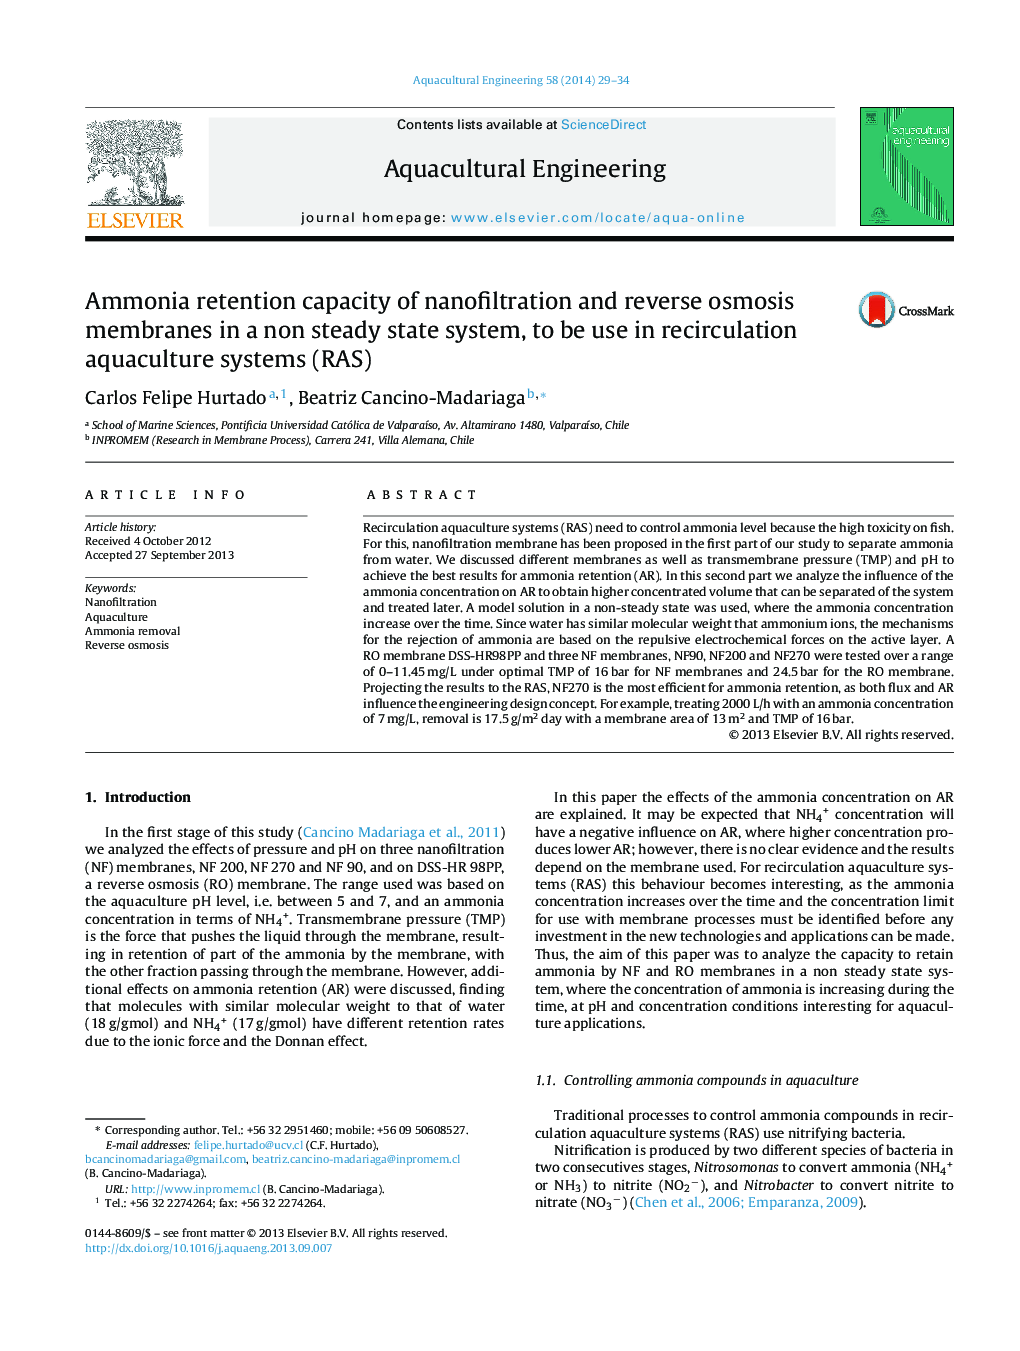 Ammonia retention capacity of nanofiltration and reverse osmosis membranes in a non steady state system, to be use in recirculation aquaculture systems (RAS)